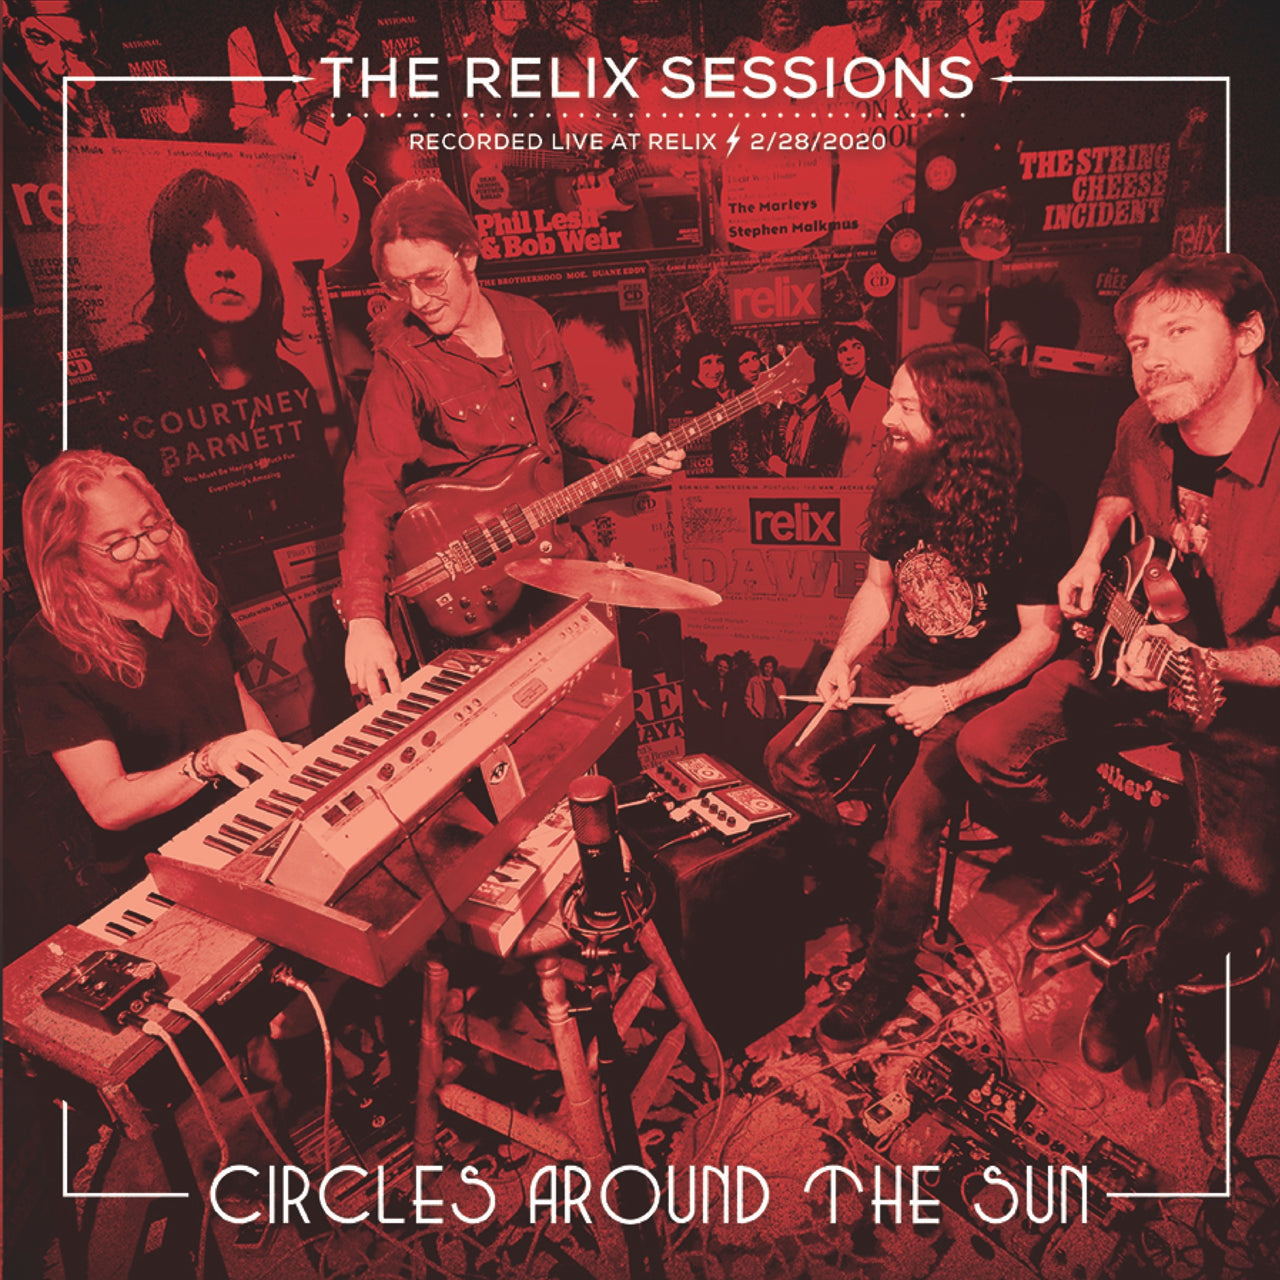 Circles Around The Sun - The Relix Session (Limited Edition Vinyl)